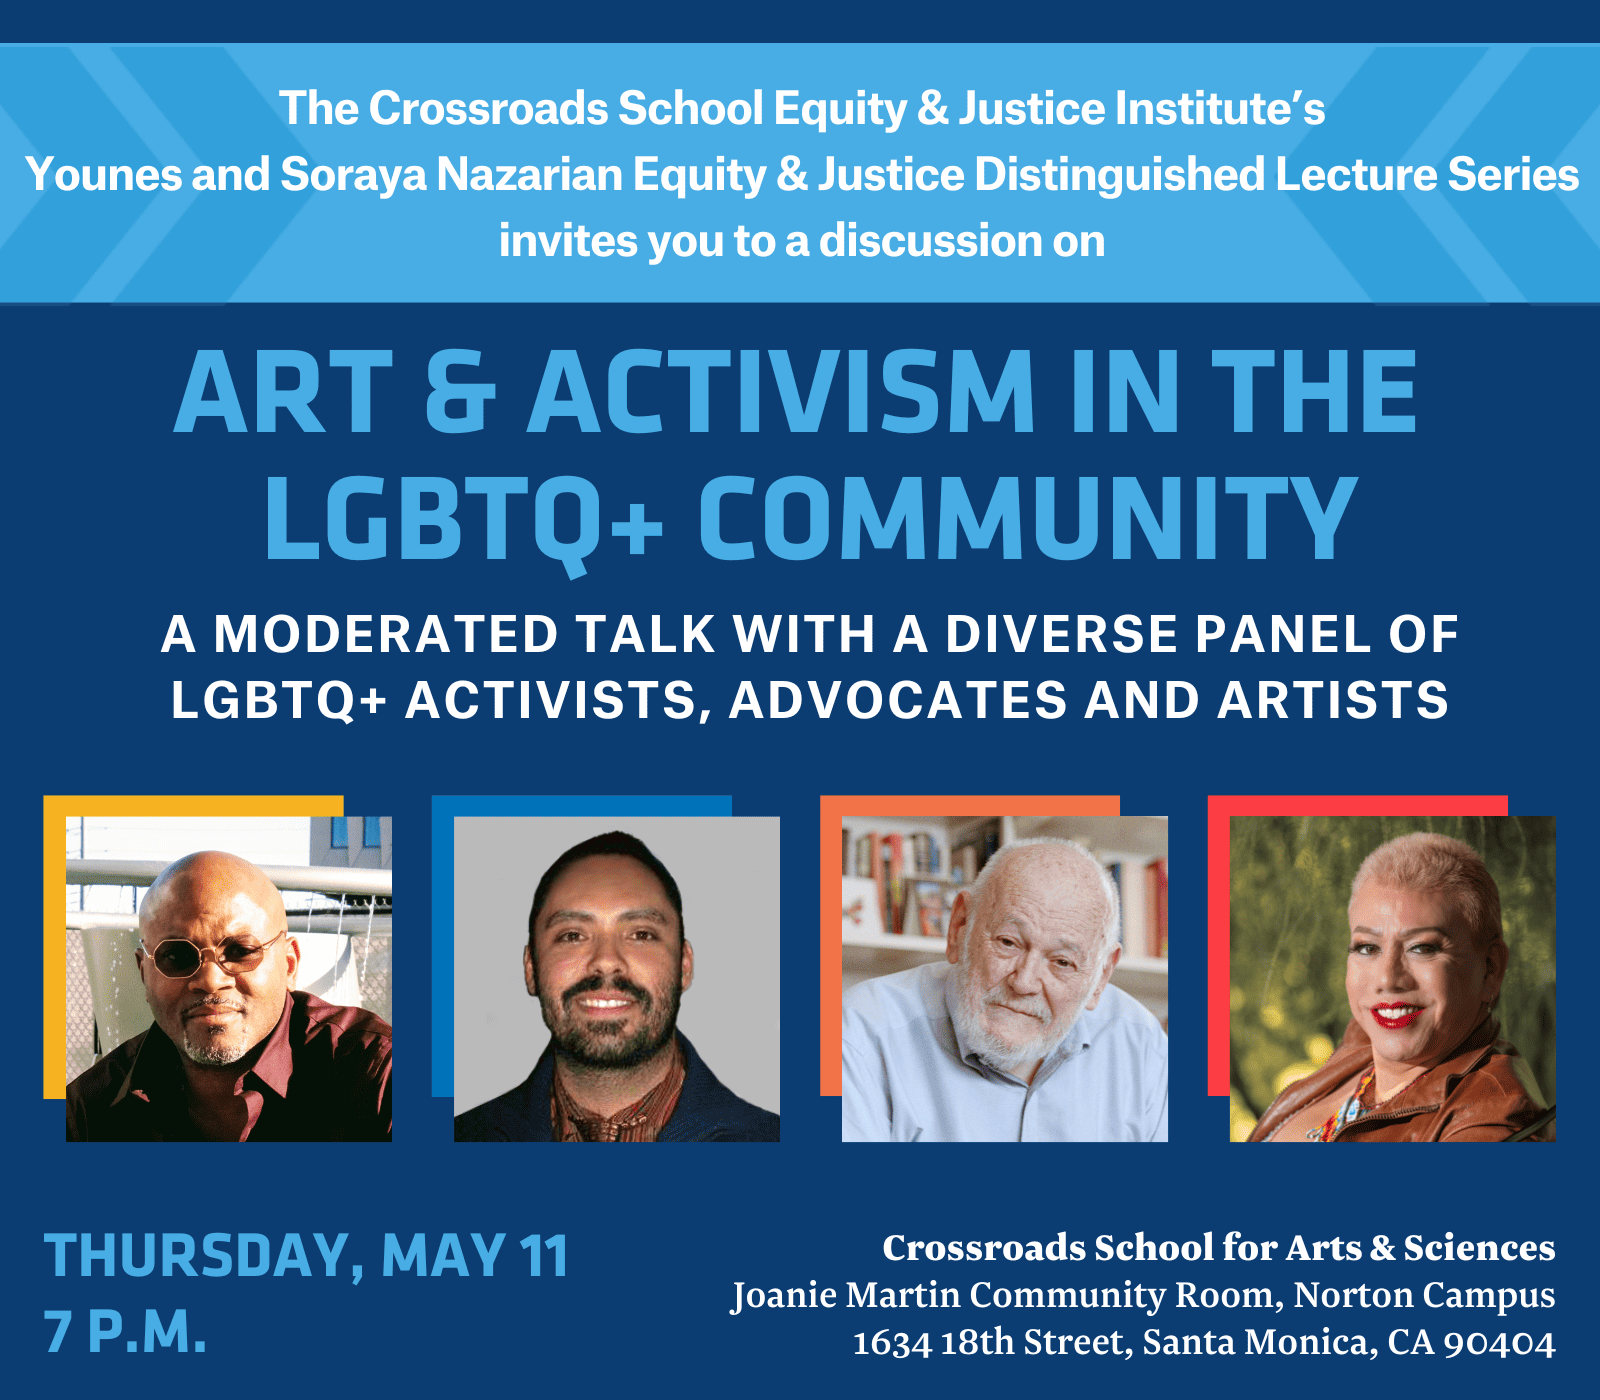 Equity & Justice Speaker Event on Art & Activism in the LGBTQ+ Community